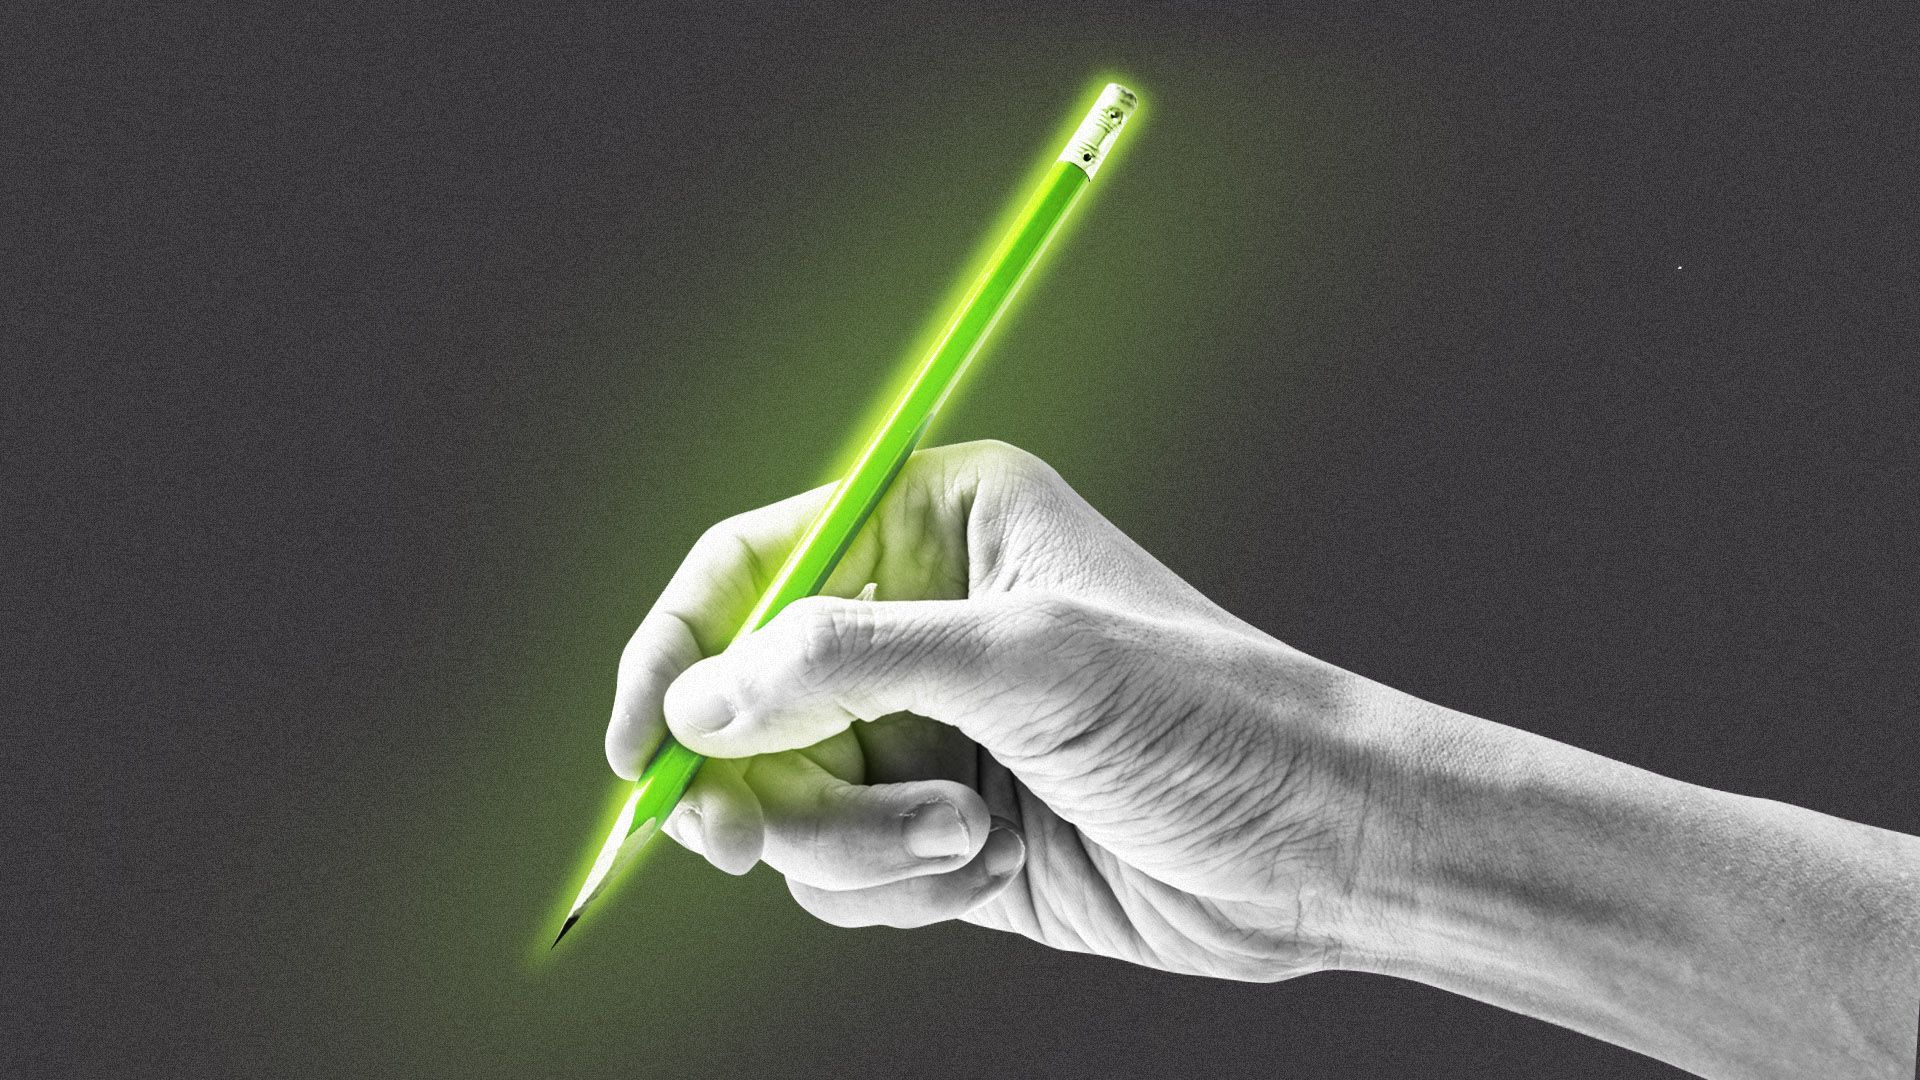 Illustration of a hand holding a glowing green pencil